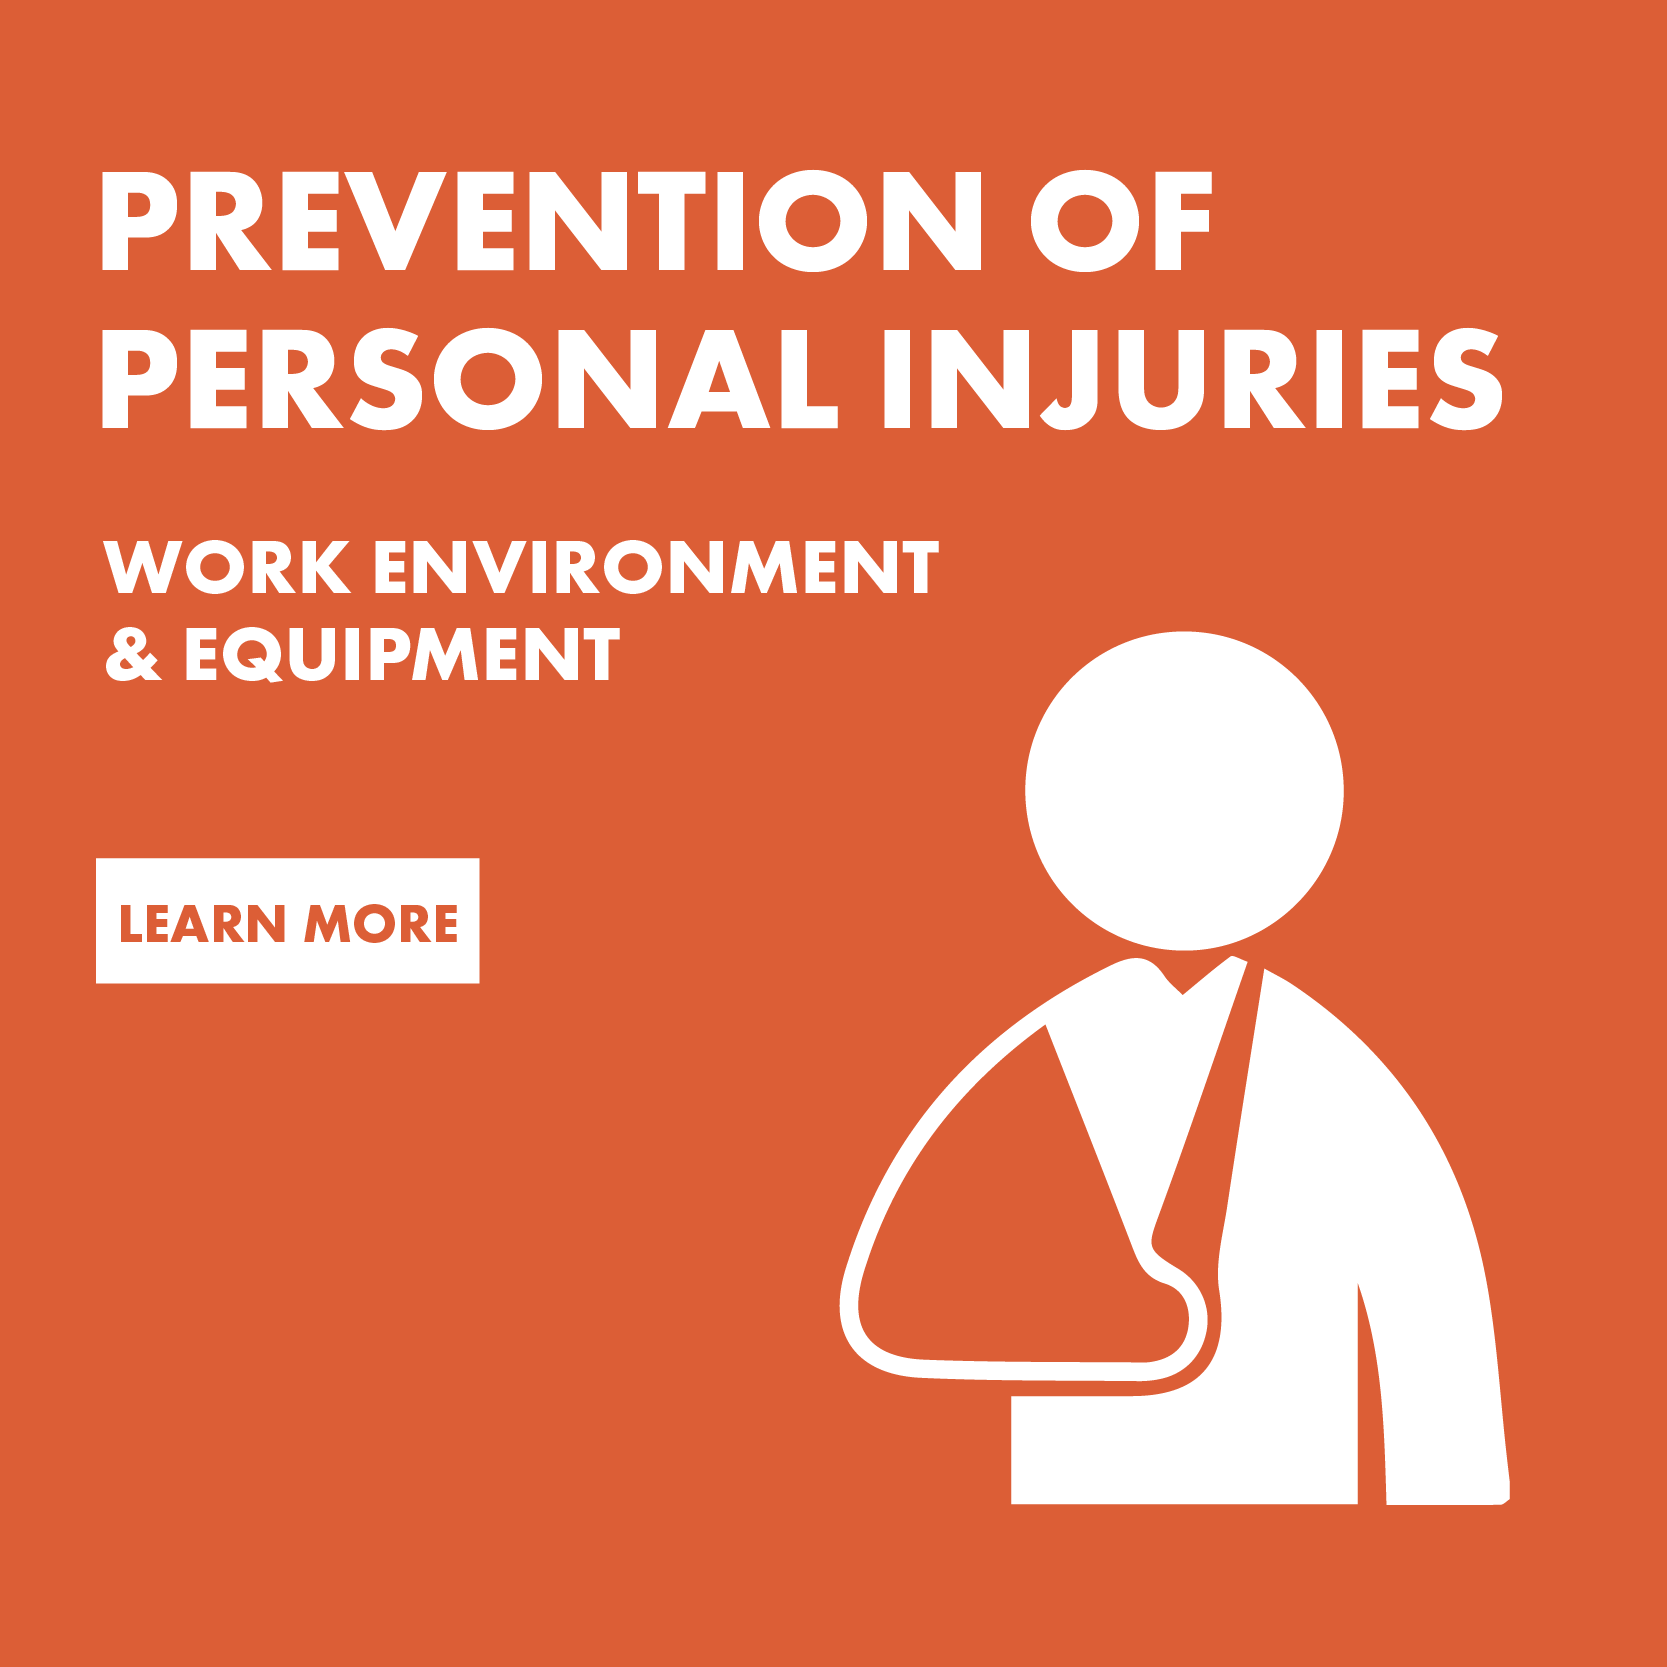 Prevention of Personal Injuries Icon-11-11-11